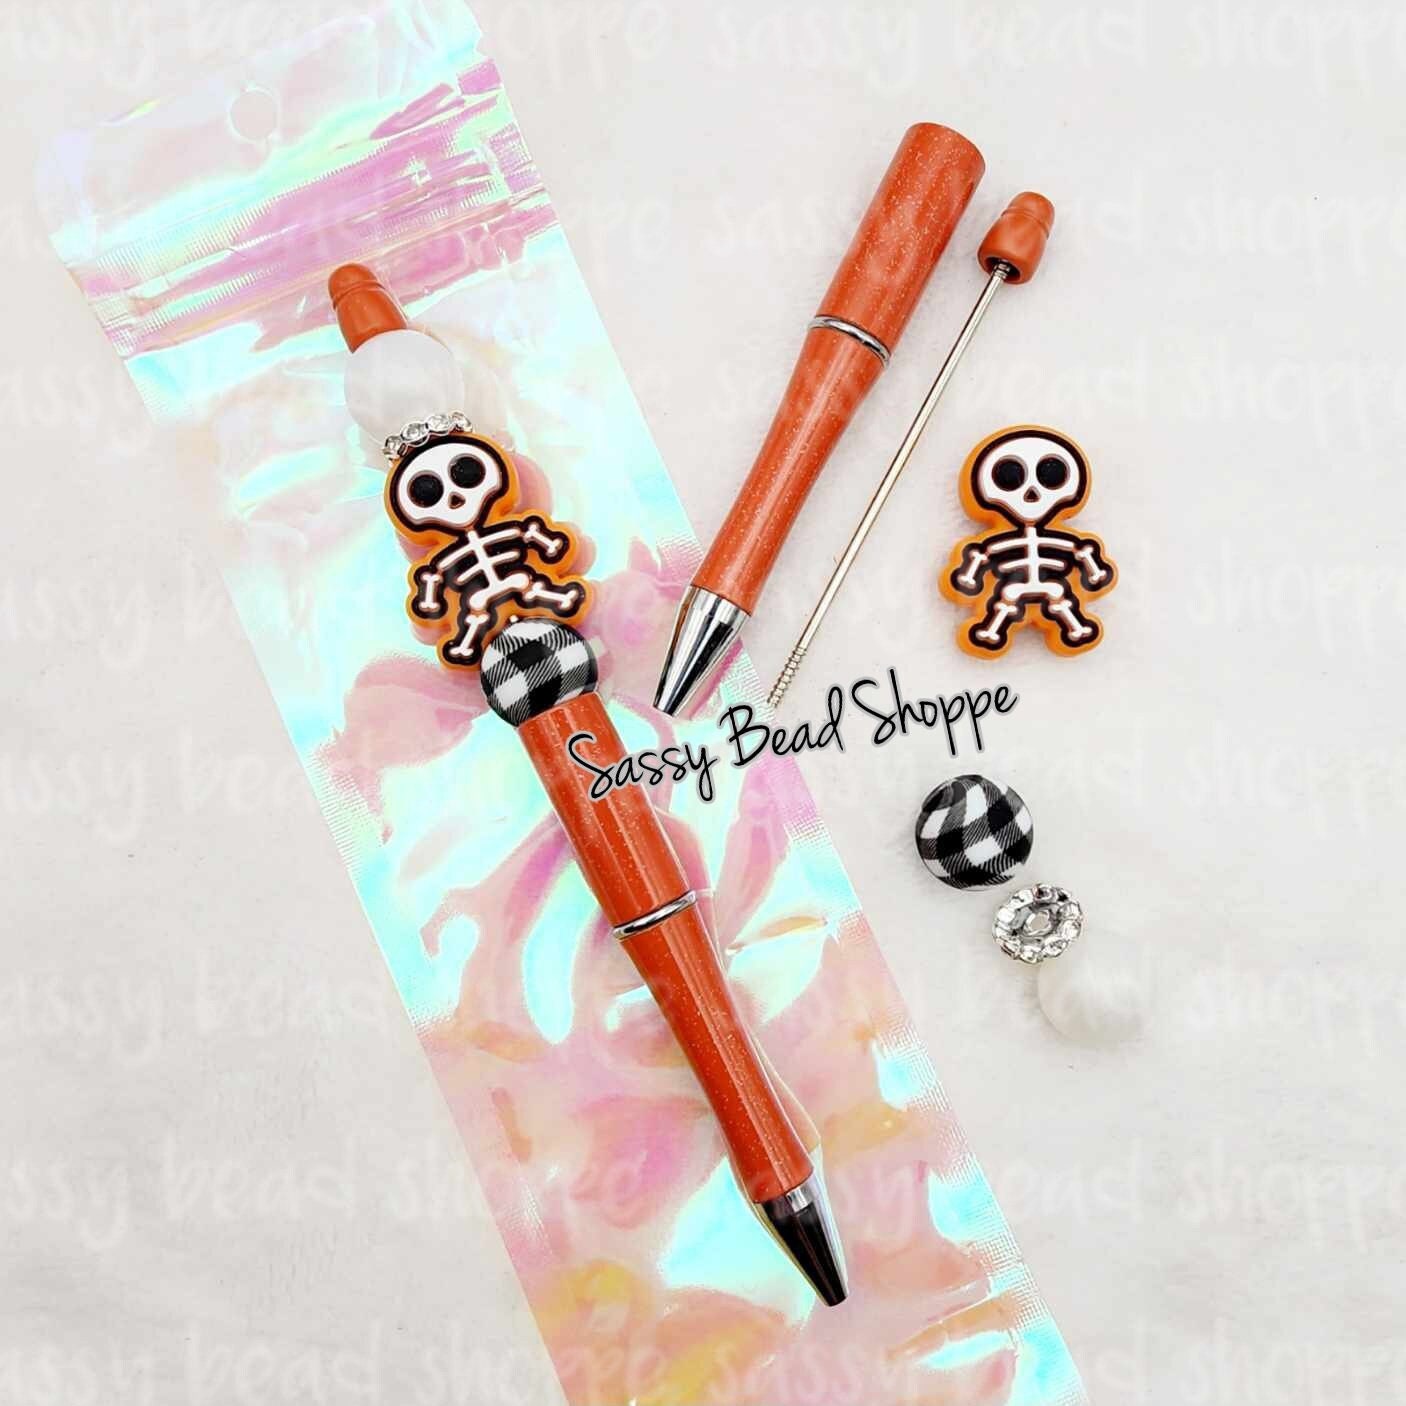 Ink Pen, White Ink Pen, Silicone Beads, Writing, Drawing, Office Supplies,  Bling 